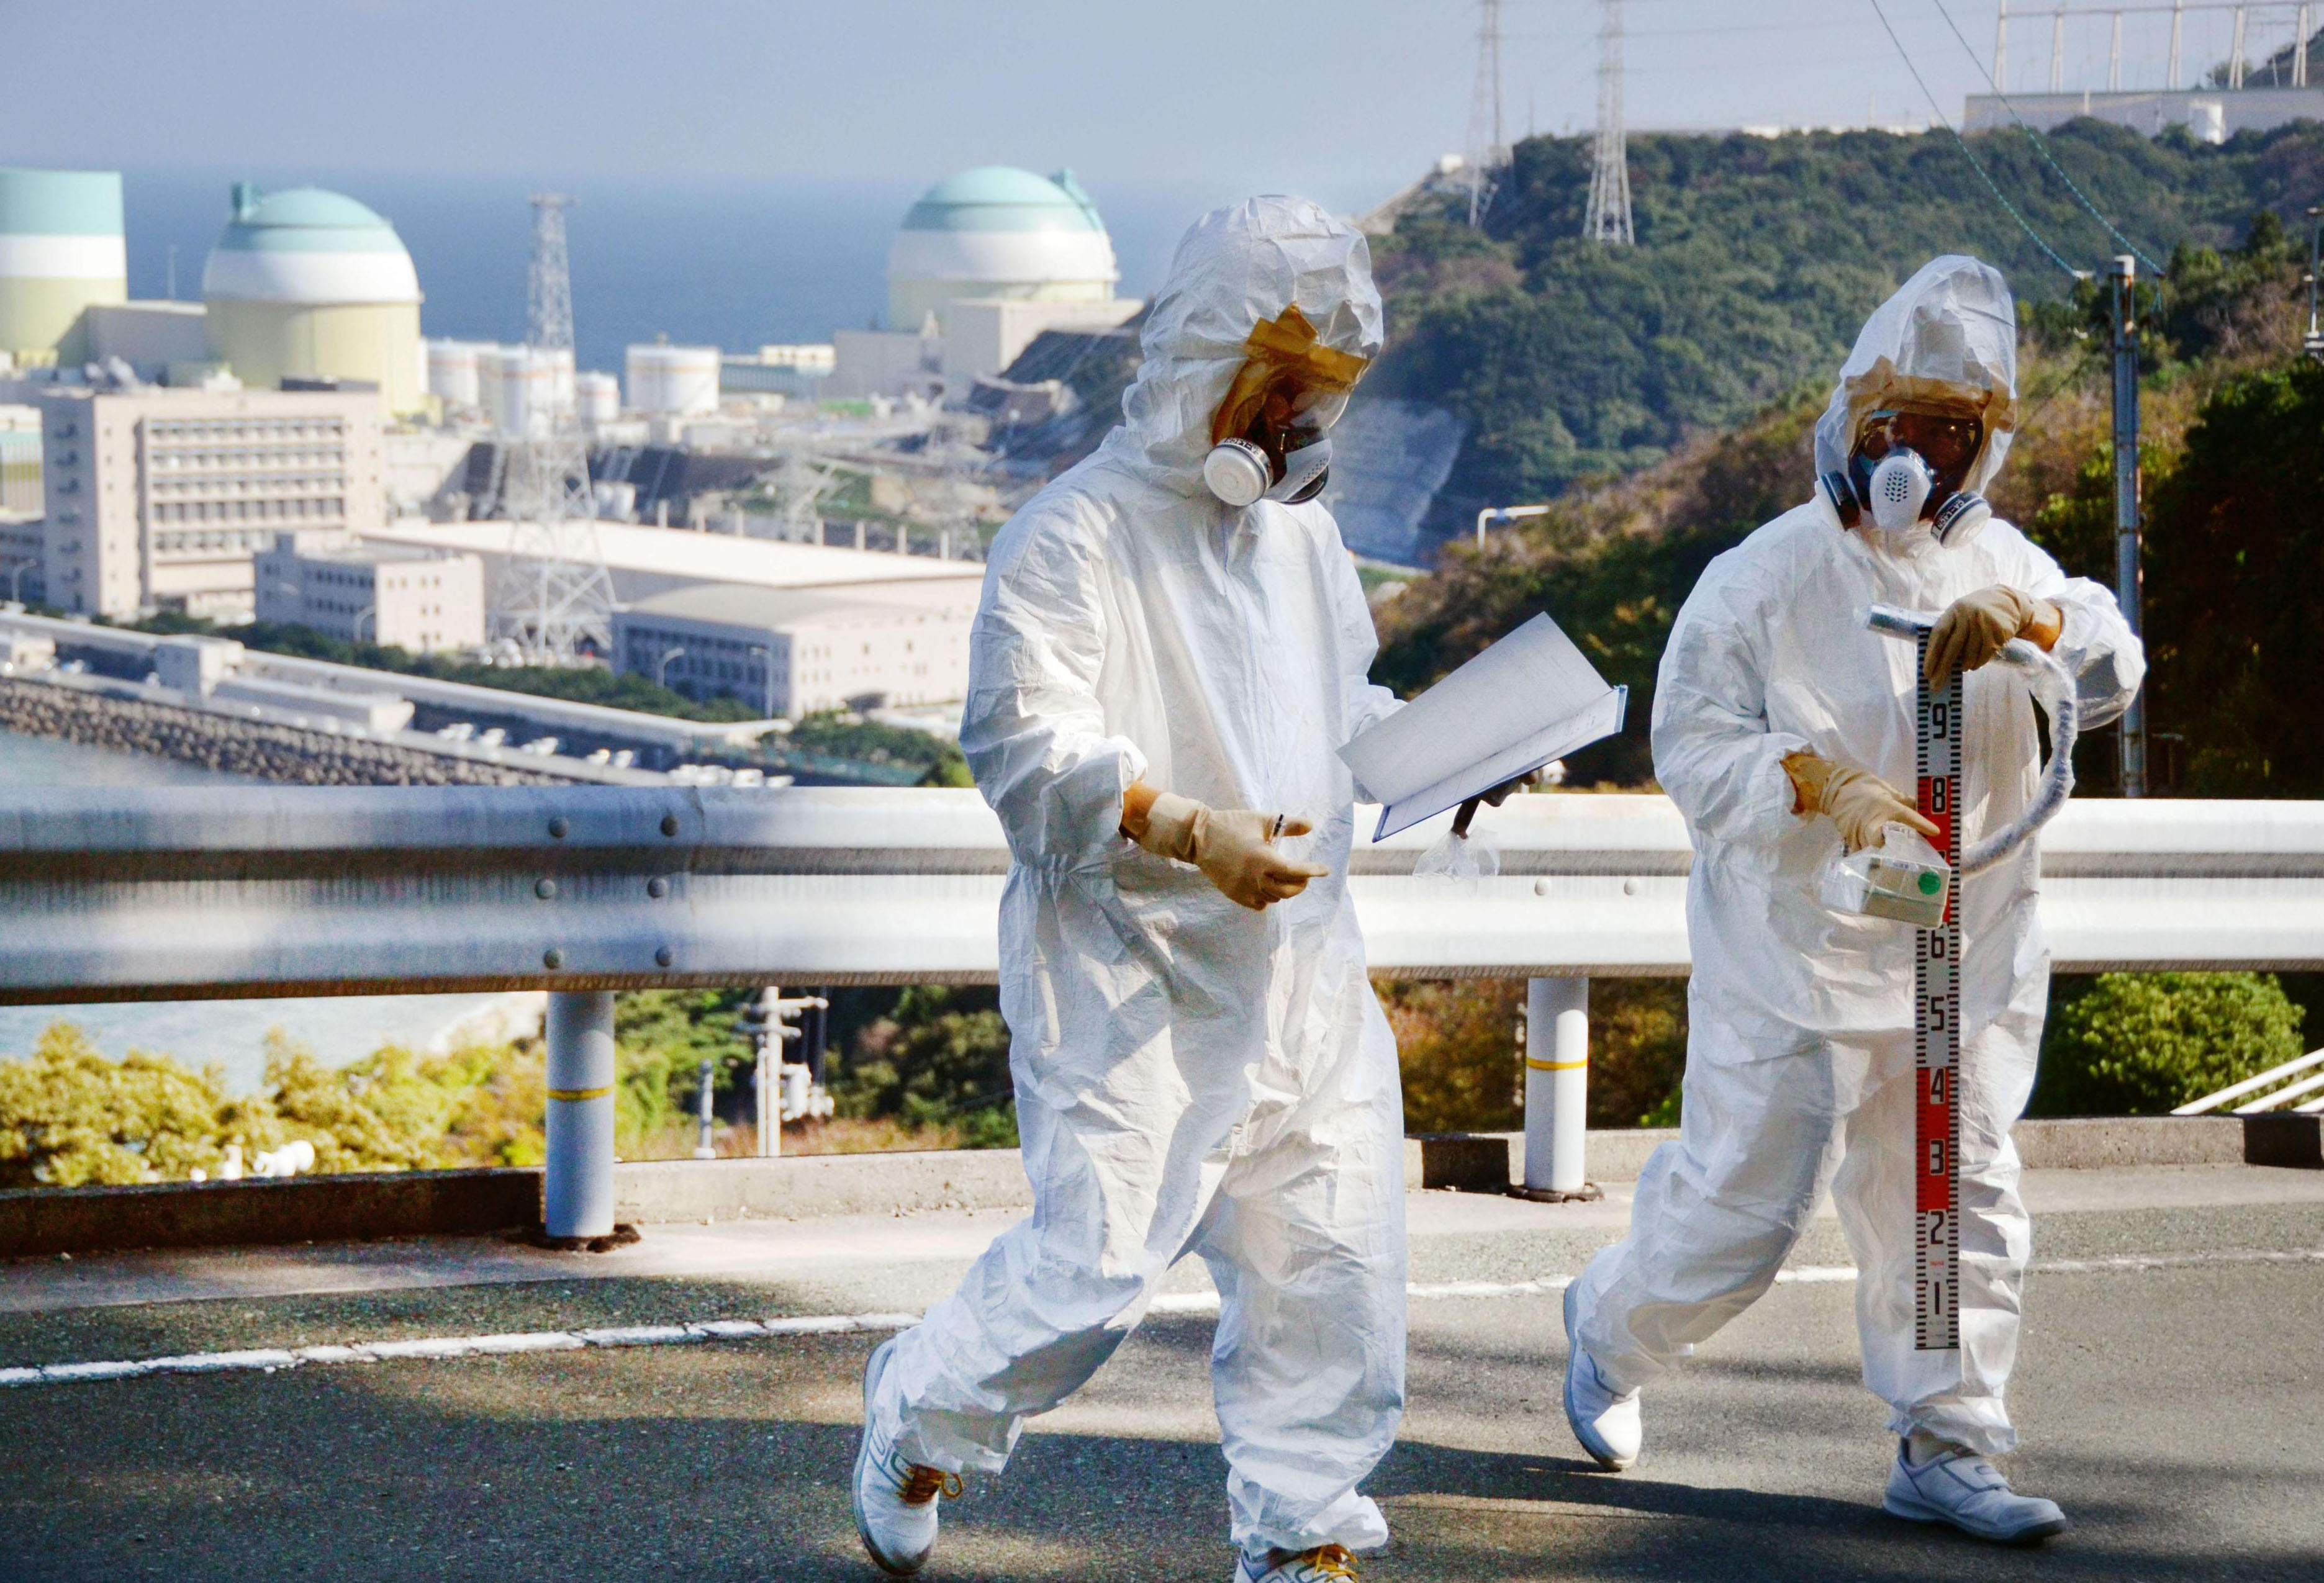 Basic training: Workers measure the level of radioactive substances around Shikoku Electric Power Co.'s Ikata atomic plant in Ehime Prefecture during a nuclear crisis drill Tuesday | KYODO